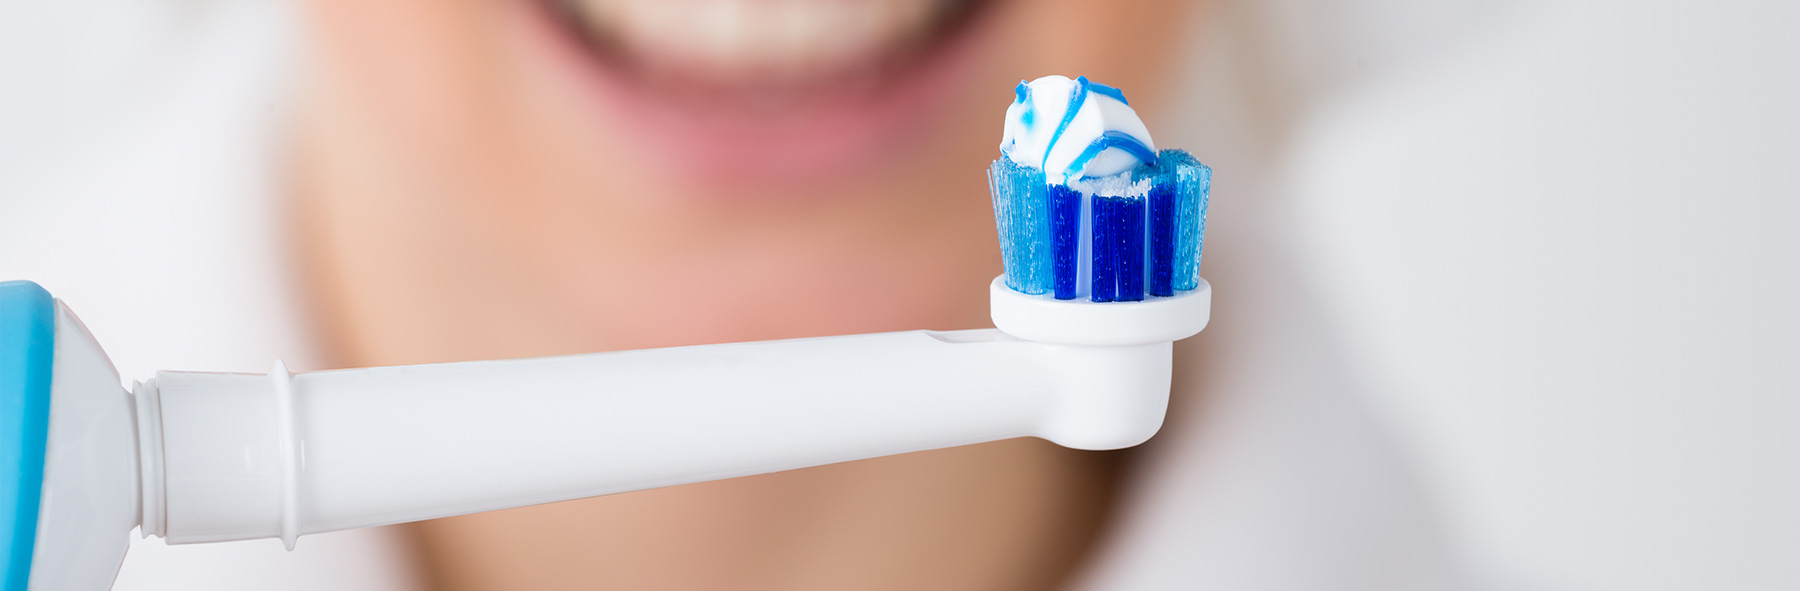 Buying an electric toothbrush: Our tips